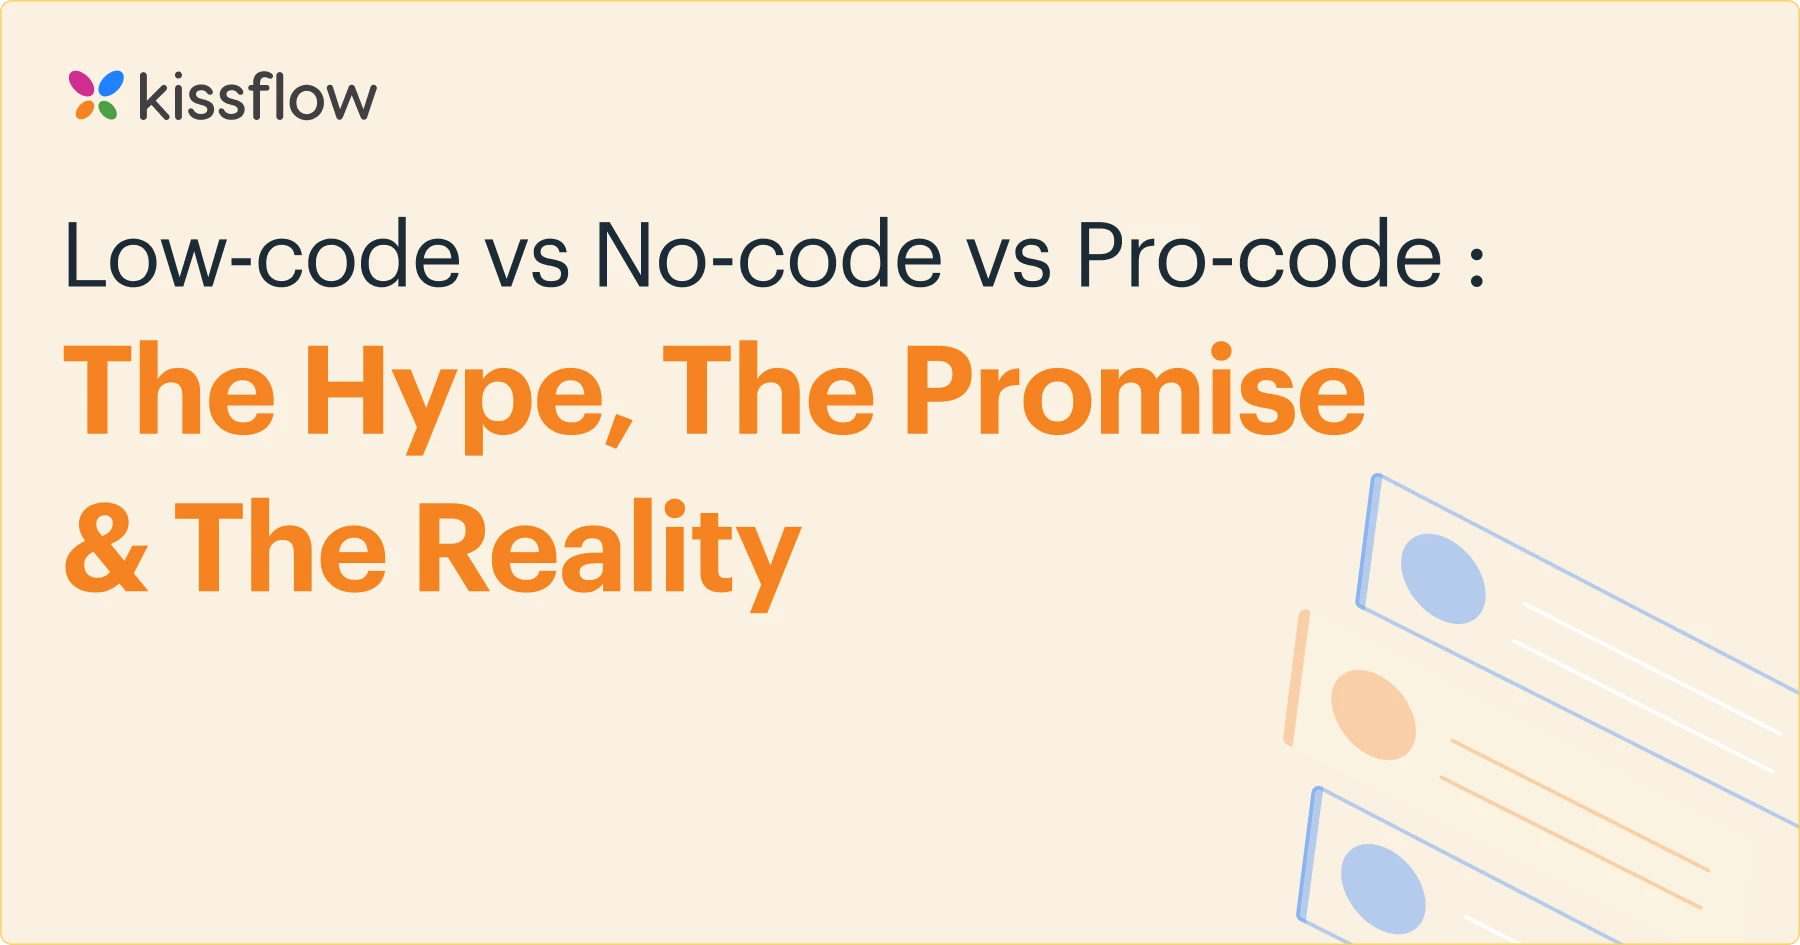 Low-code vs No-code vs Pro-code : The Hype, The Promise & The Reality